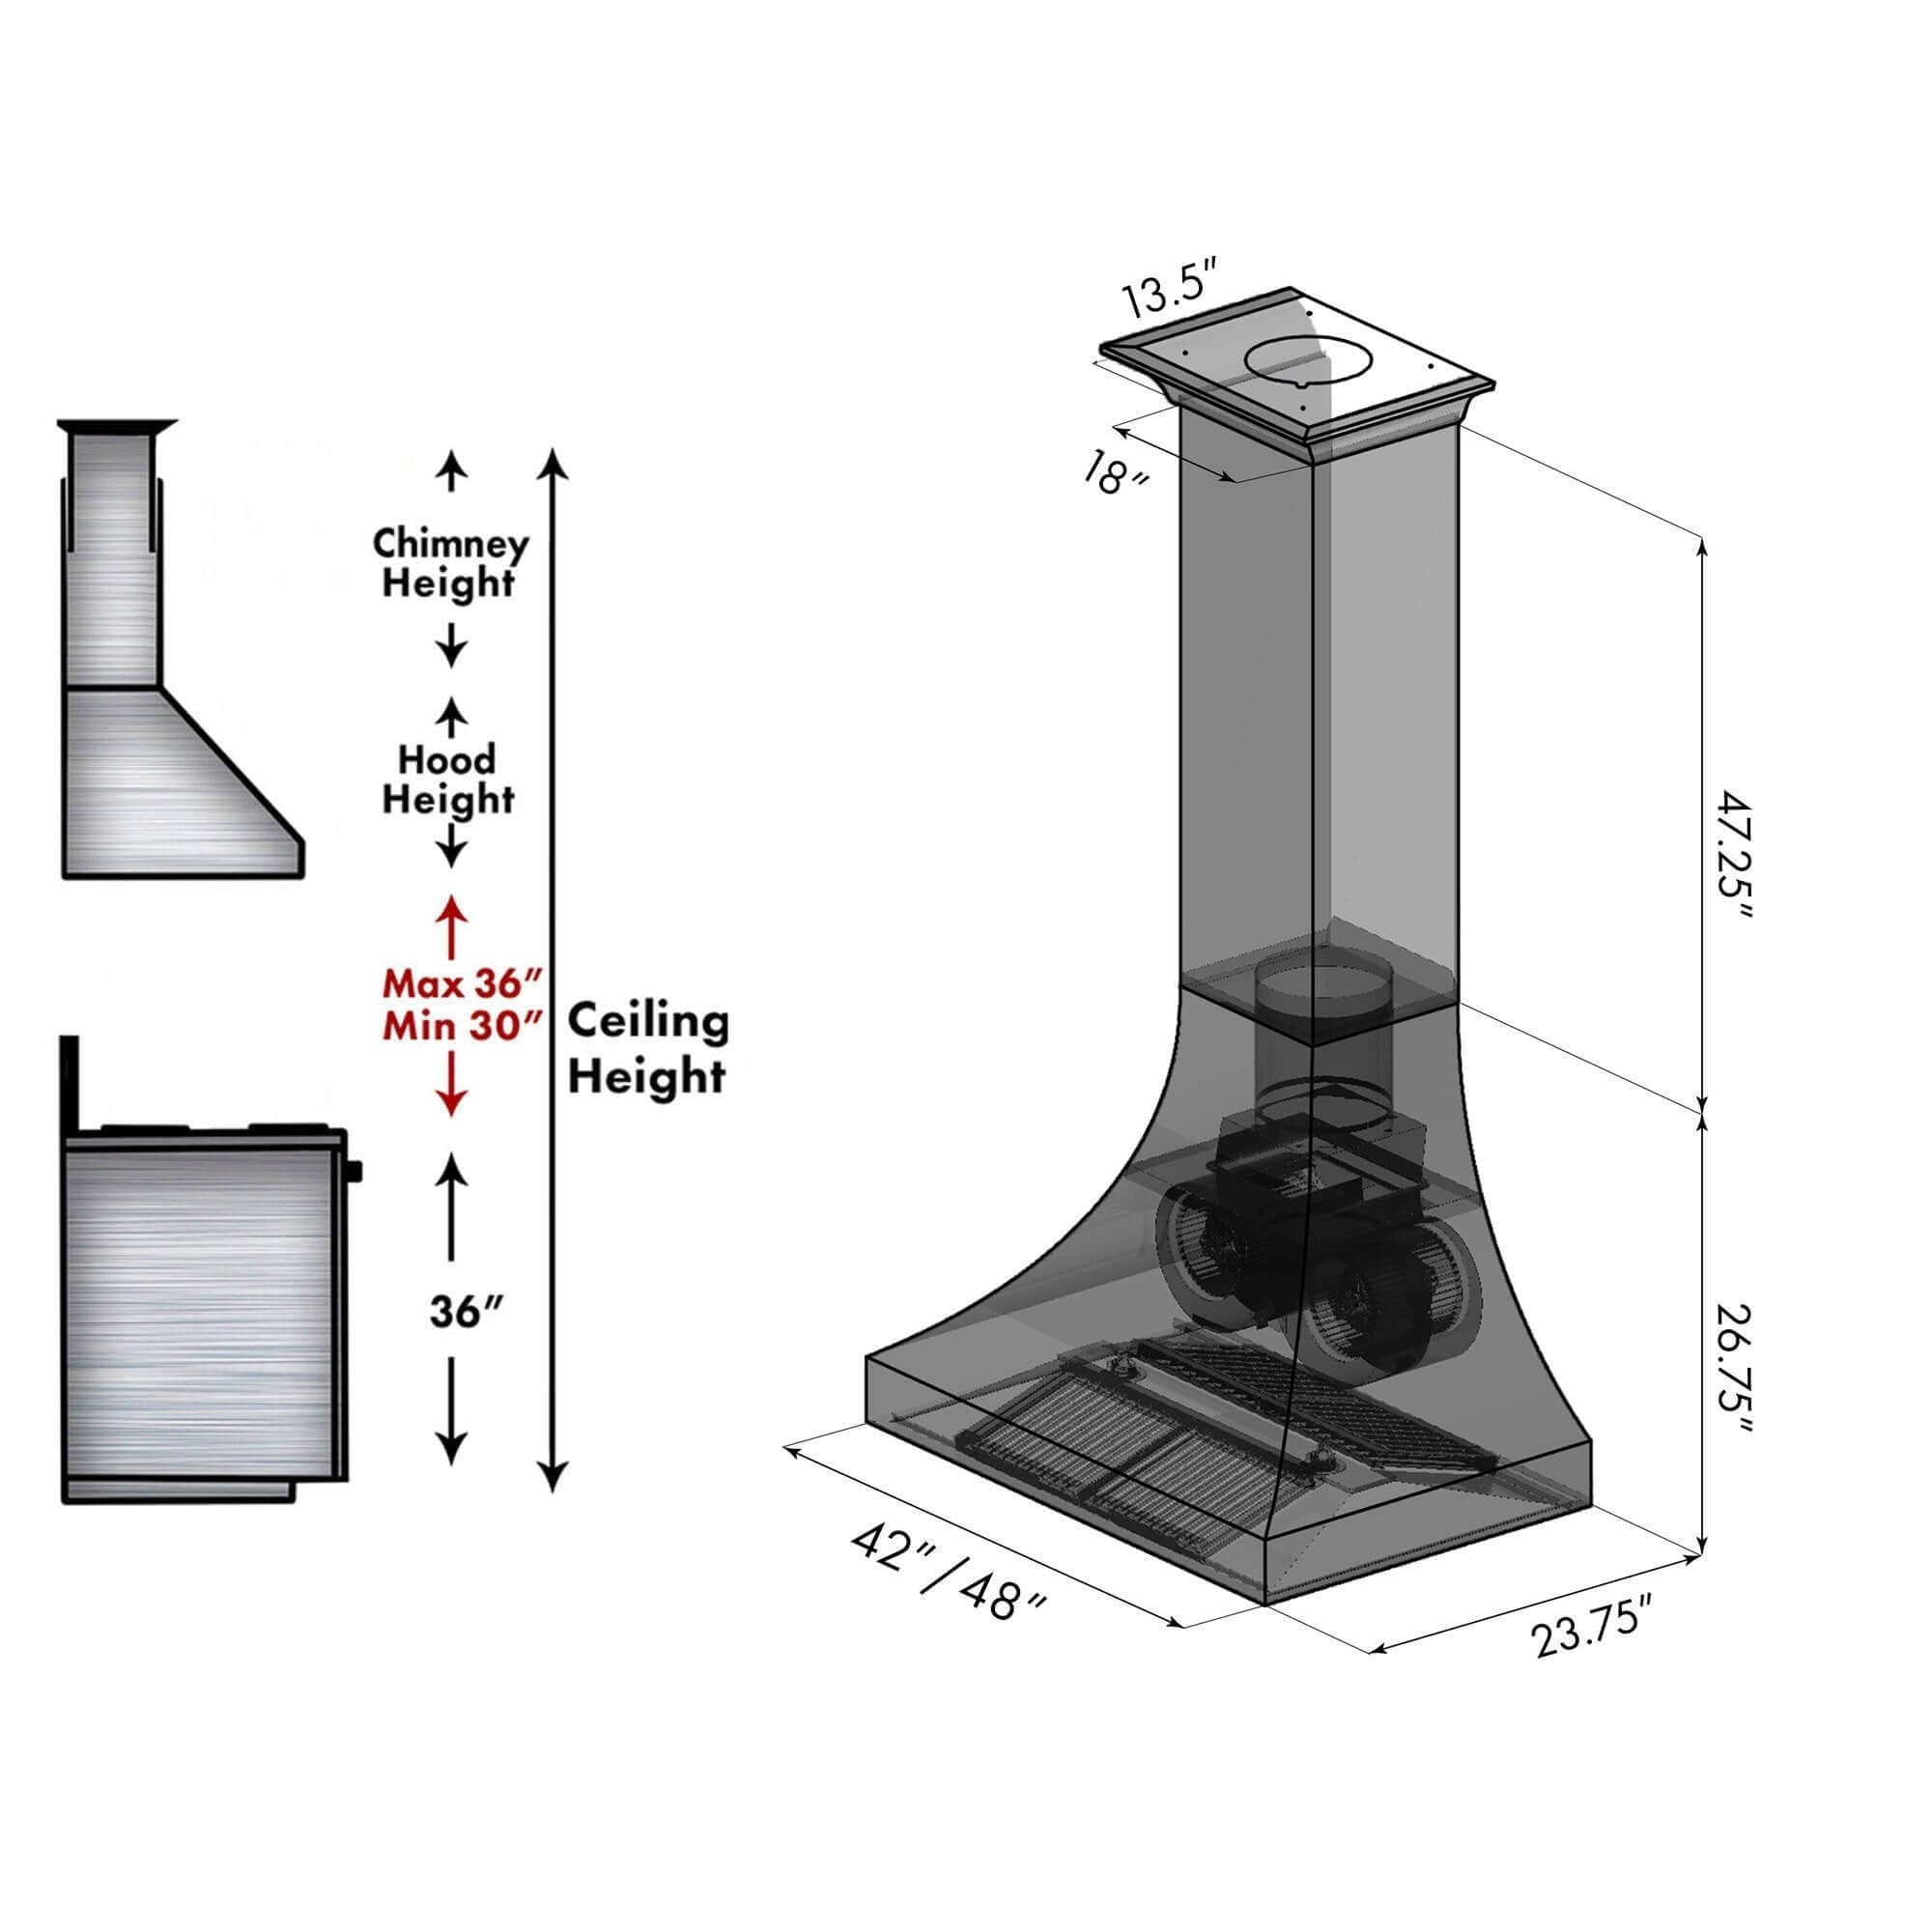 ZLINE Designer Series DuraSnow® Stainless Steel Wall Range Hood (8632S) chimney height guide and dimensional measurements for 42" and 48" sizes.